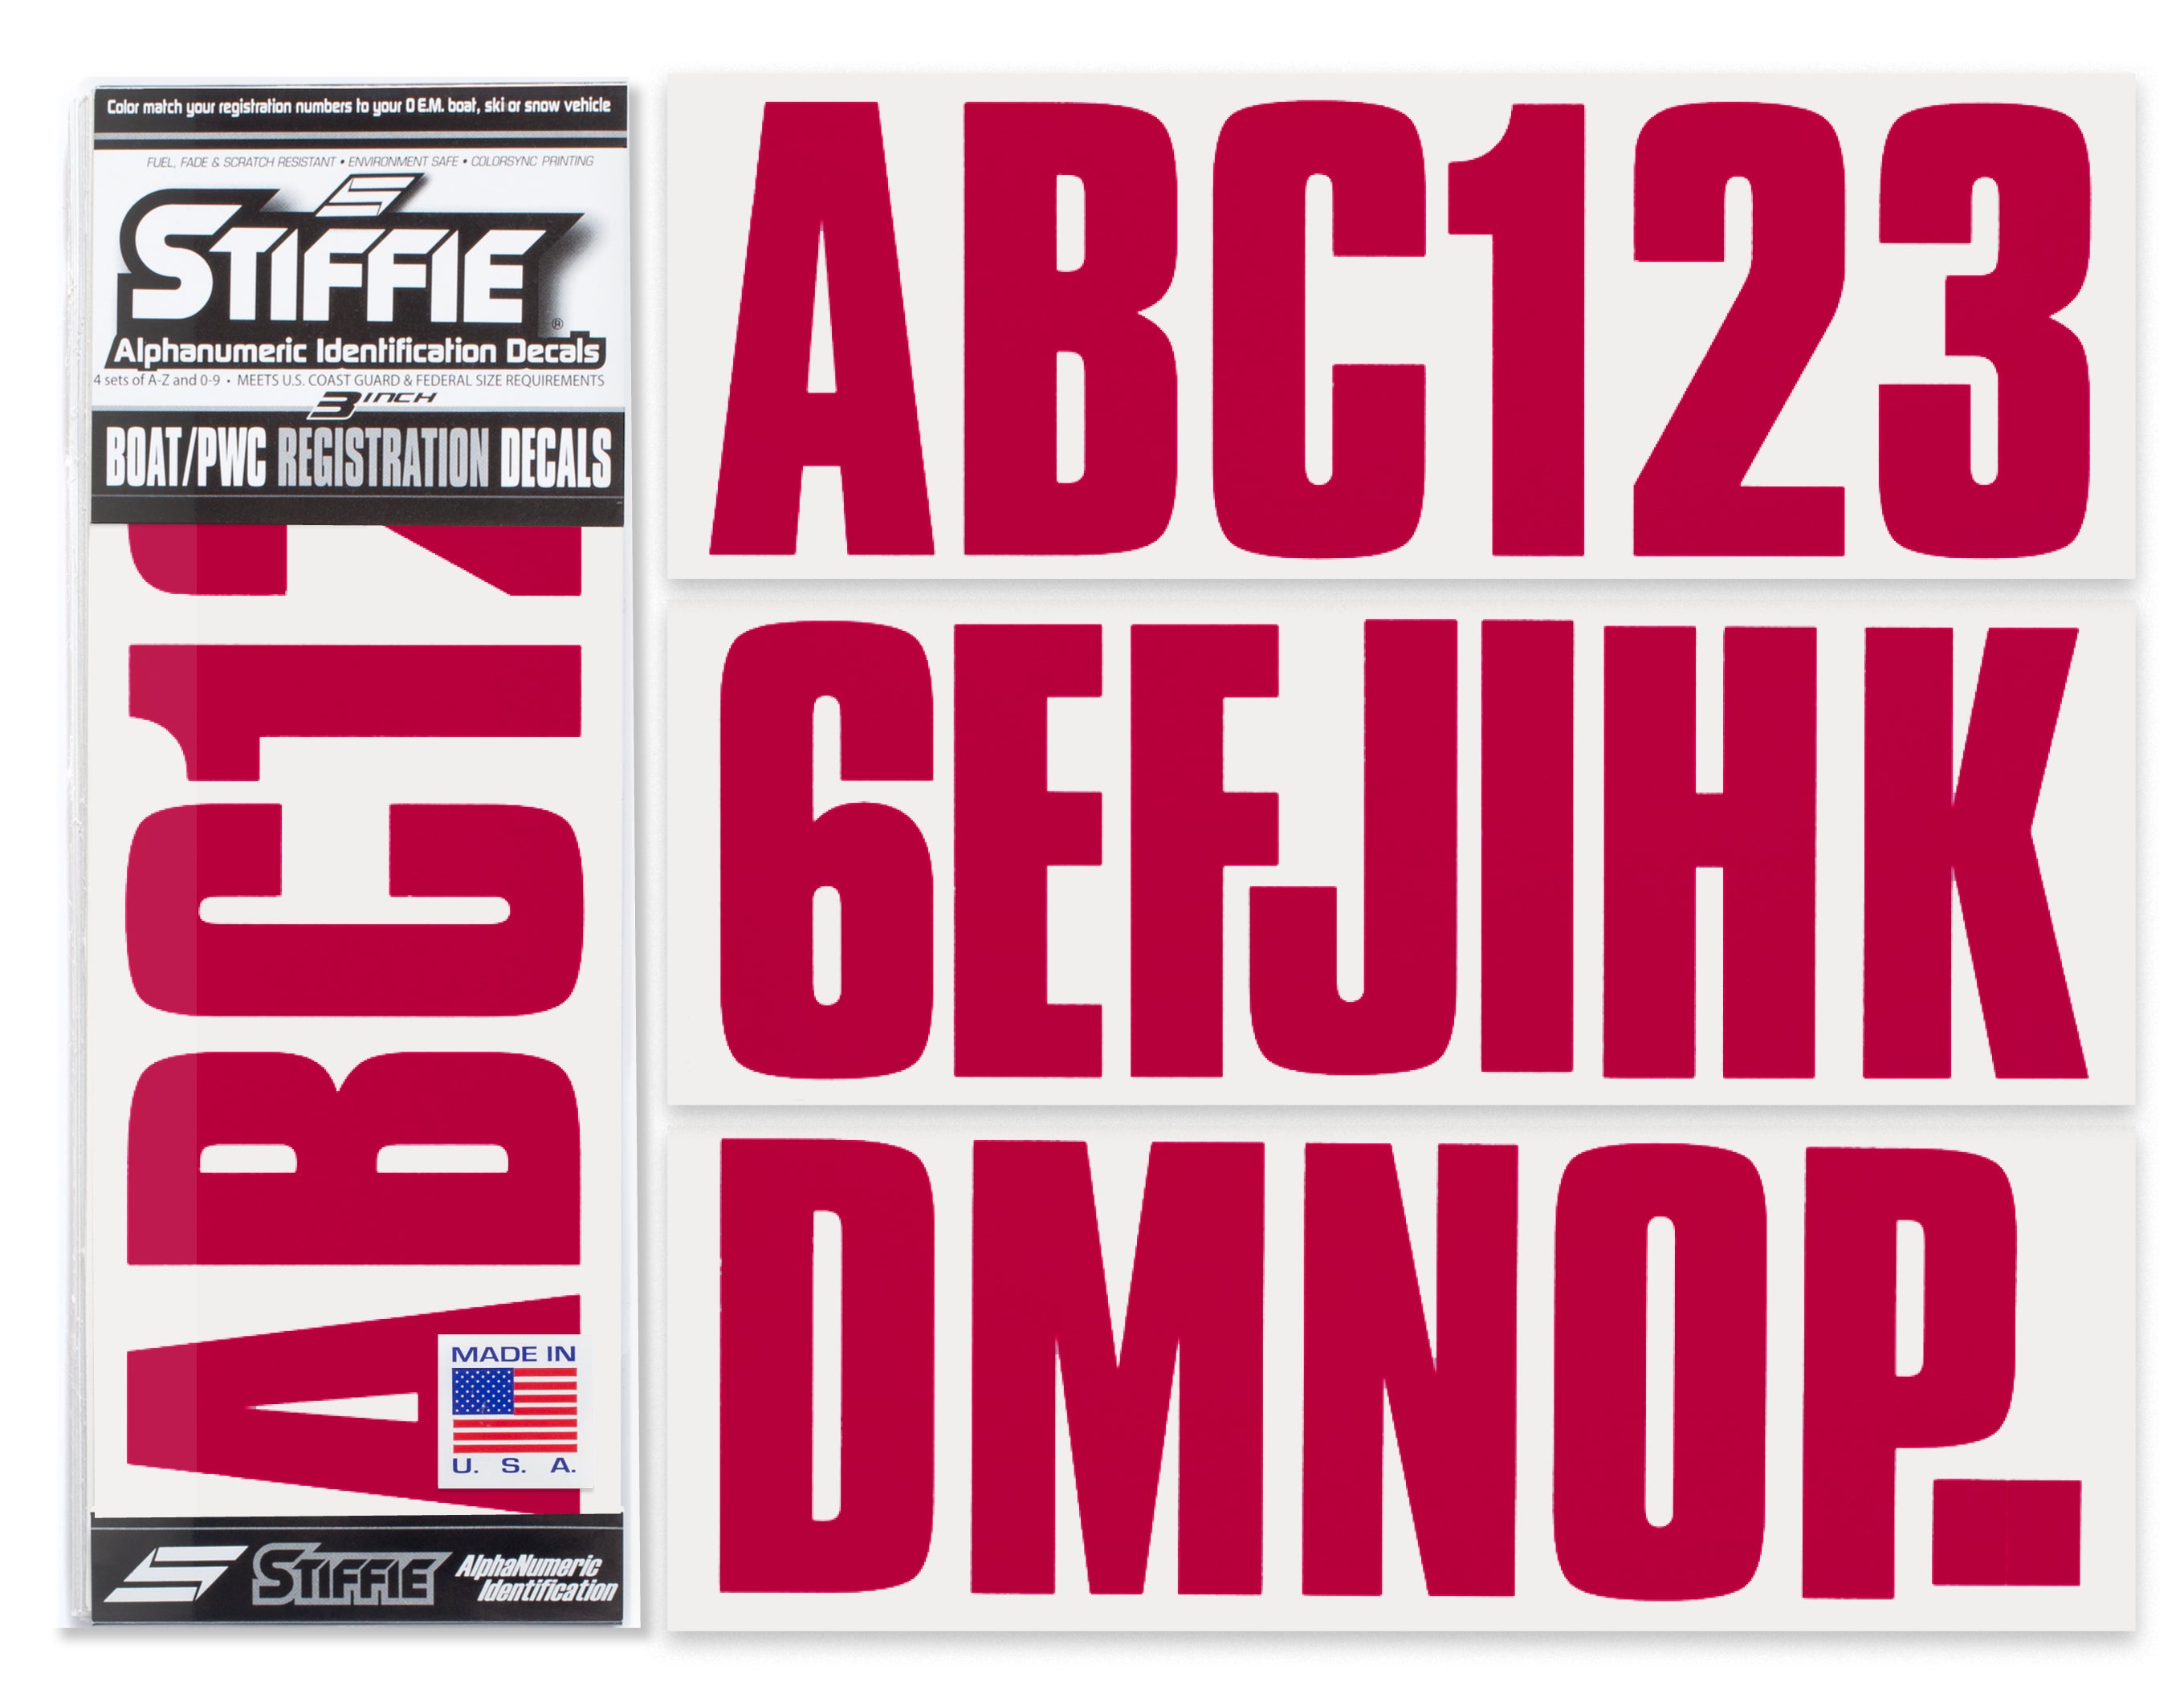 STIFFIE Uniline Burgundy 3" ID Kit Alpha-Numeric Registration Identification Numbers Stickers Decals for Boats & Personal Watercraft